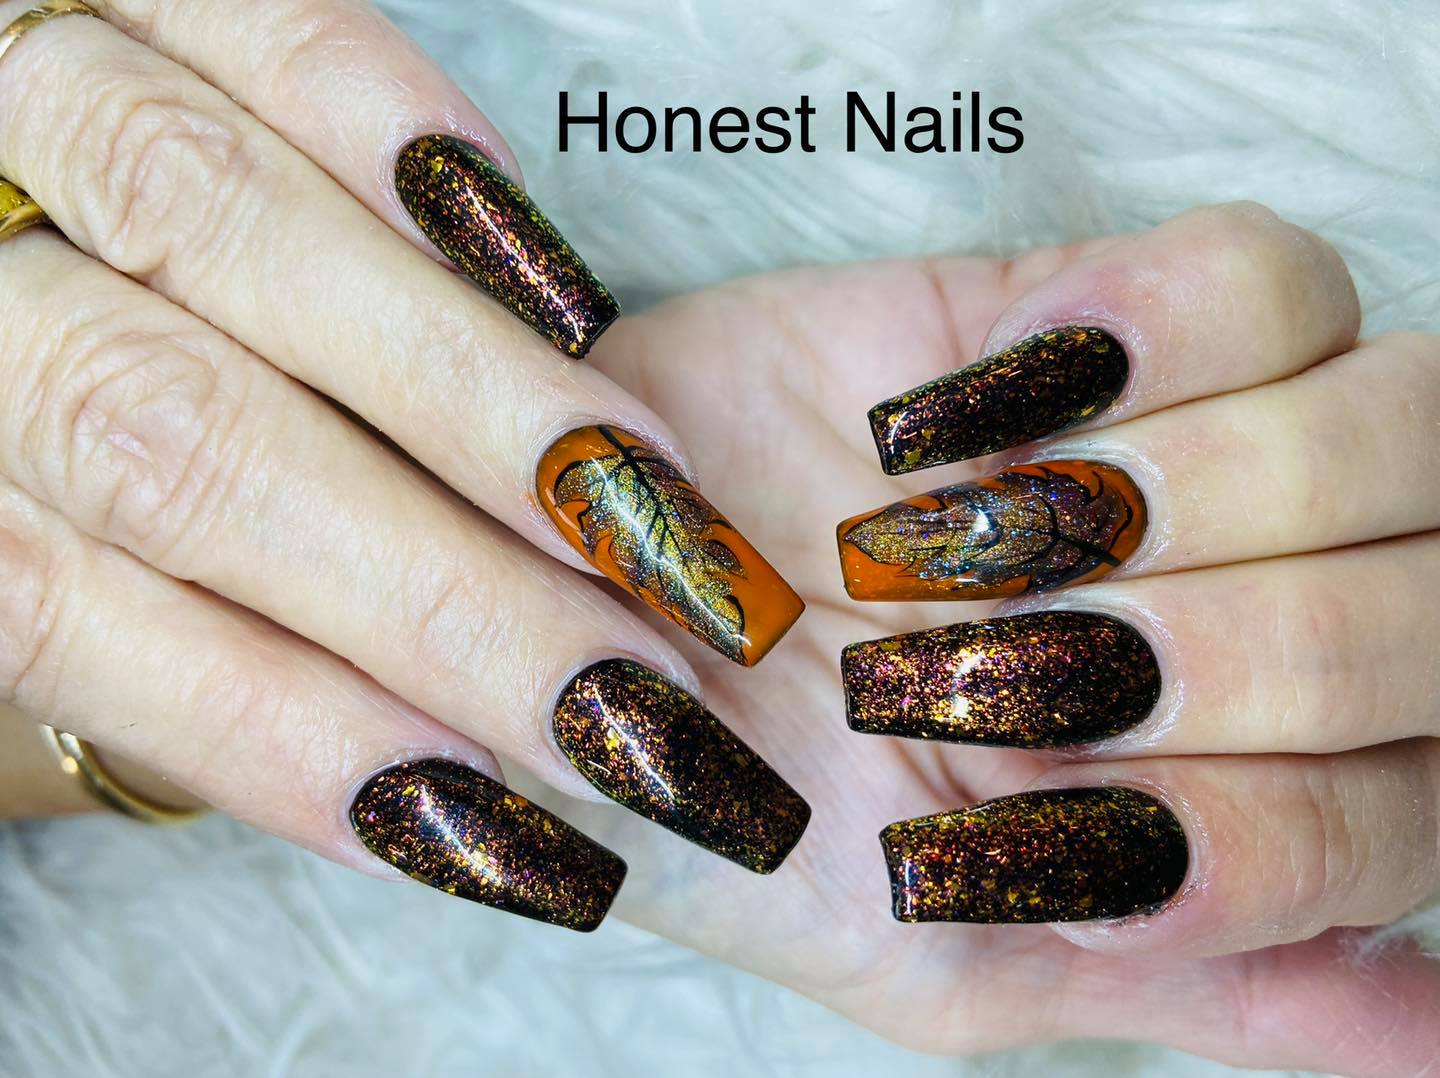 2. OPI To Be Perfectly Honest Nail Lacquer - wide 8